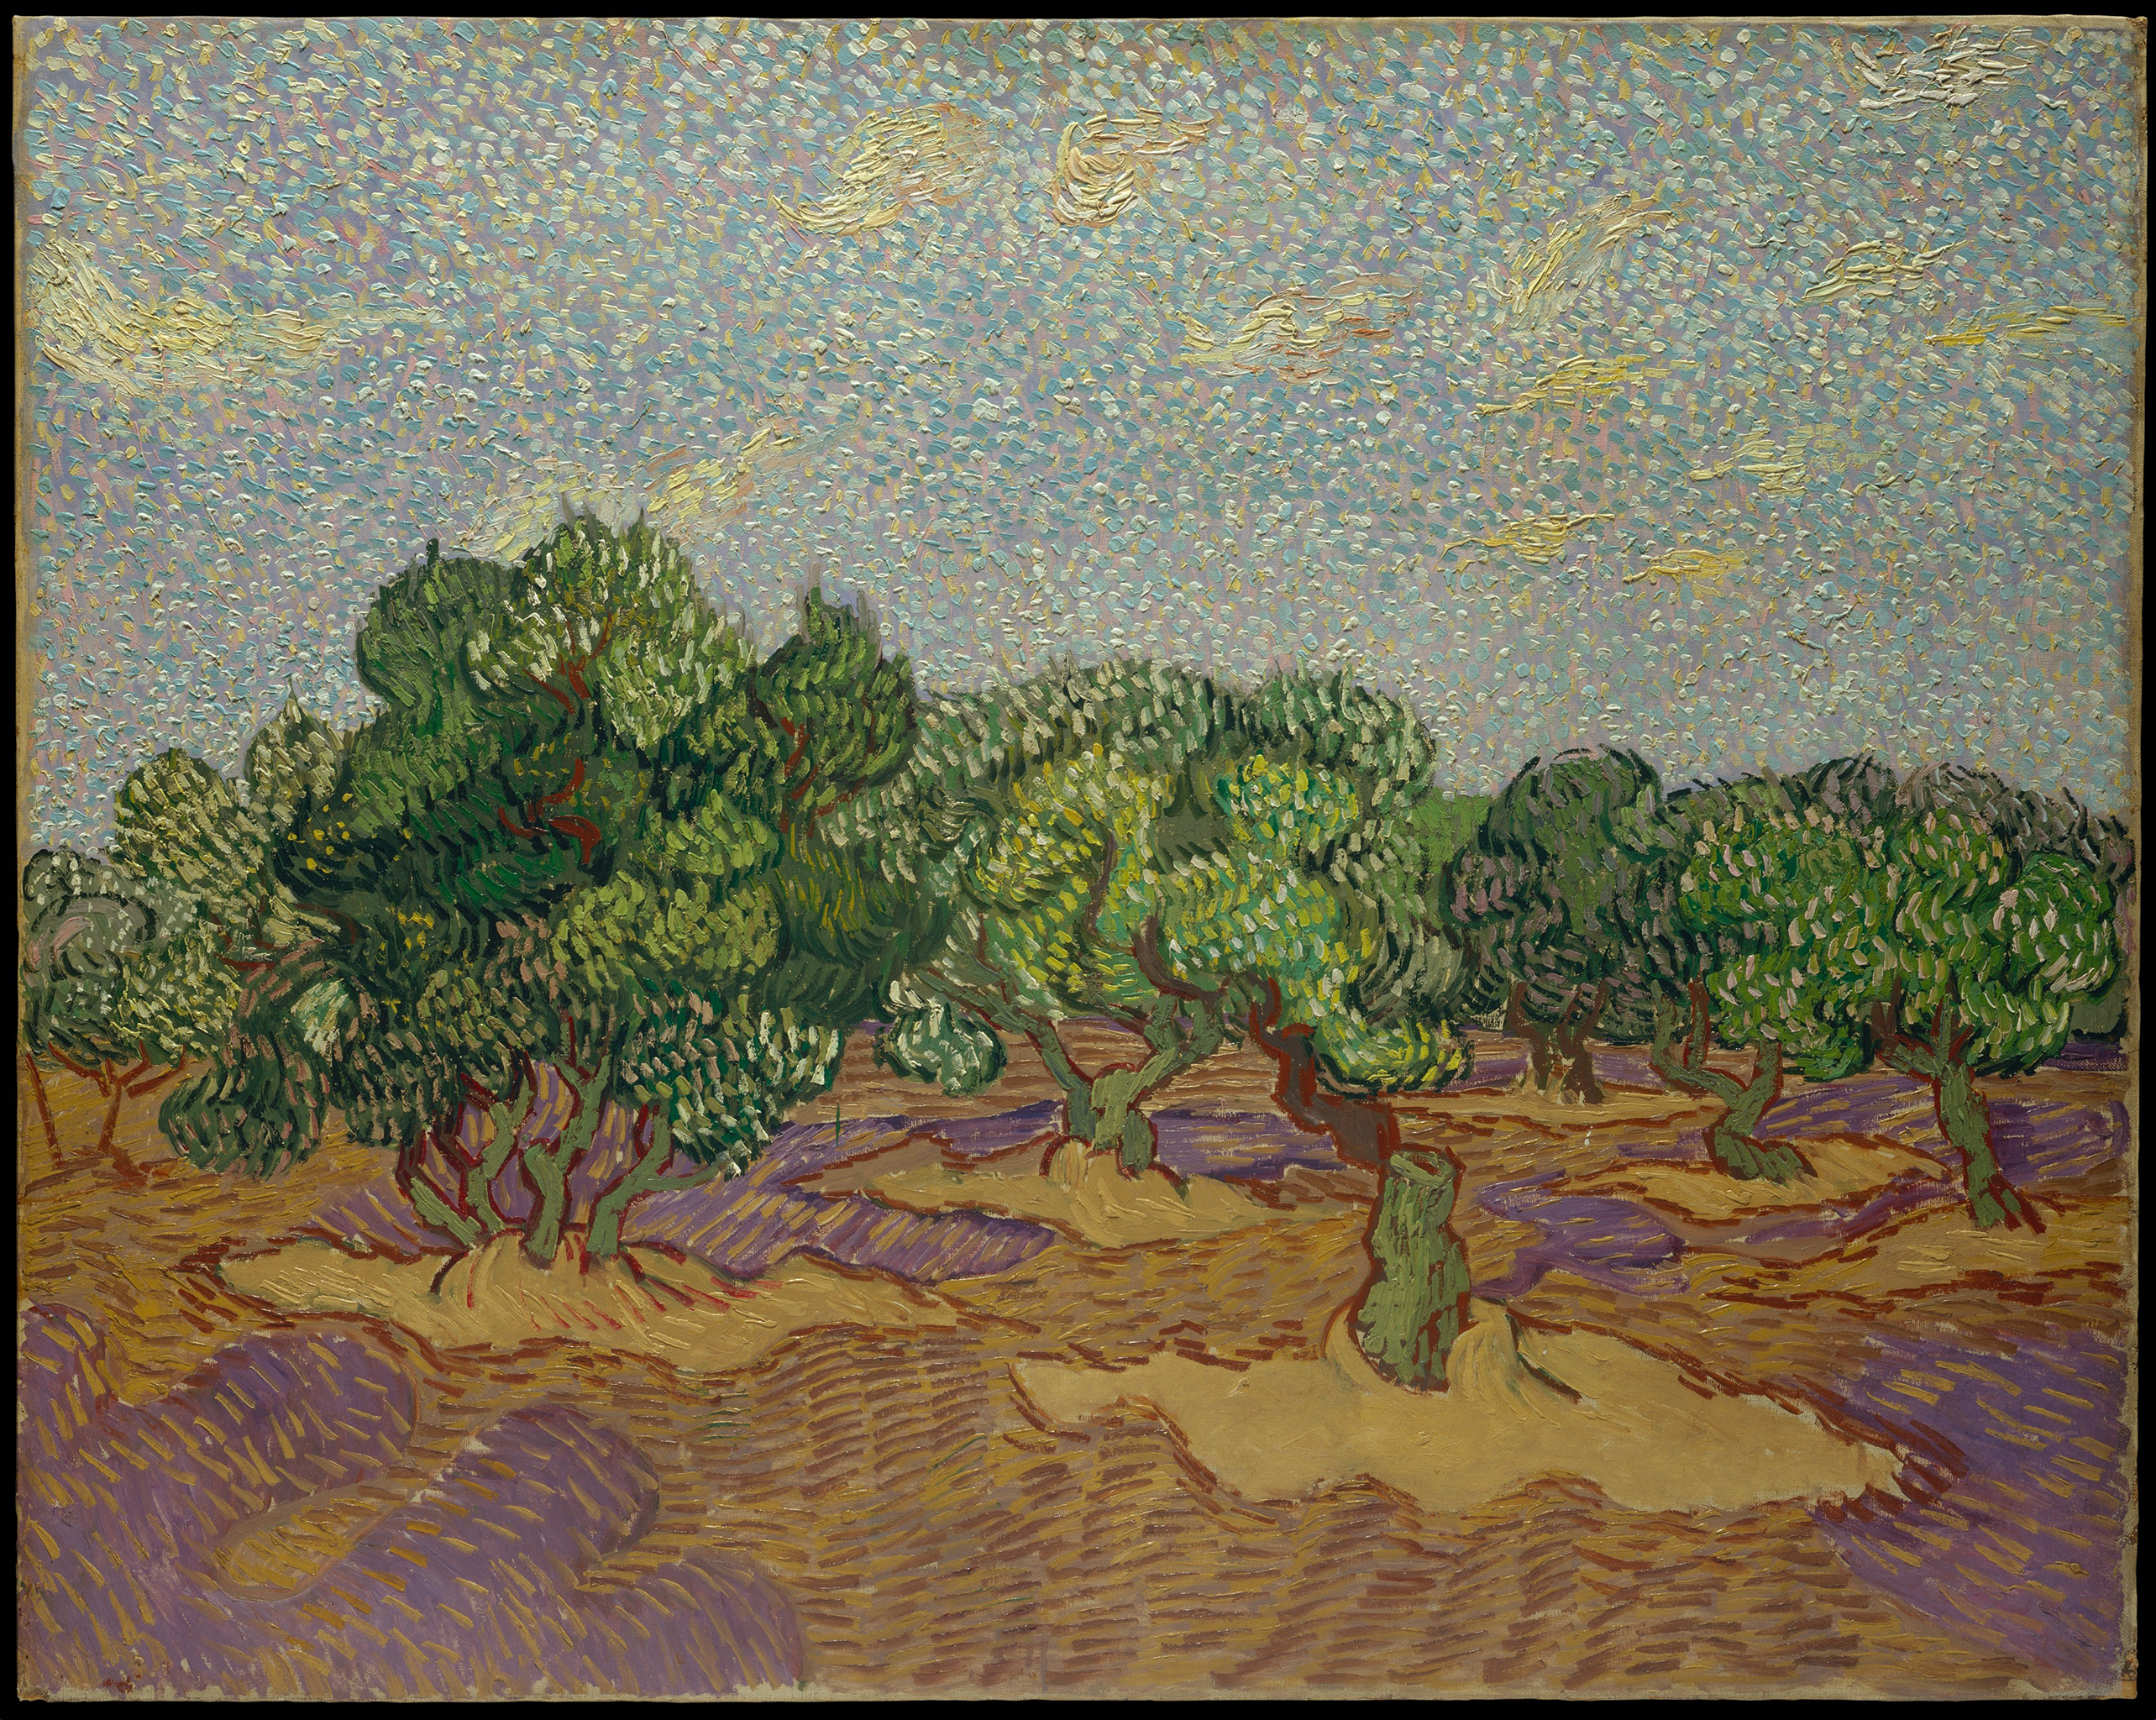 A painting depicting a short green tree in a yellow field. On the field, there are splashes of people along the yellow and brown field. The leaves on the green trees have white and light green dots. The sky above is also made up from a large number of light-colored dots that overlap on a blue cloudy sky,